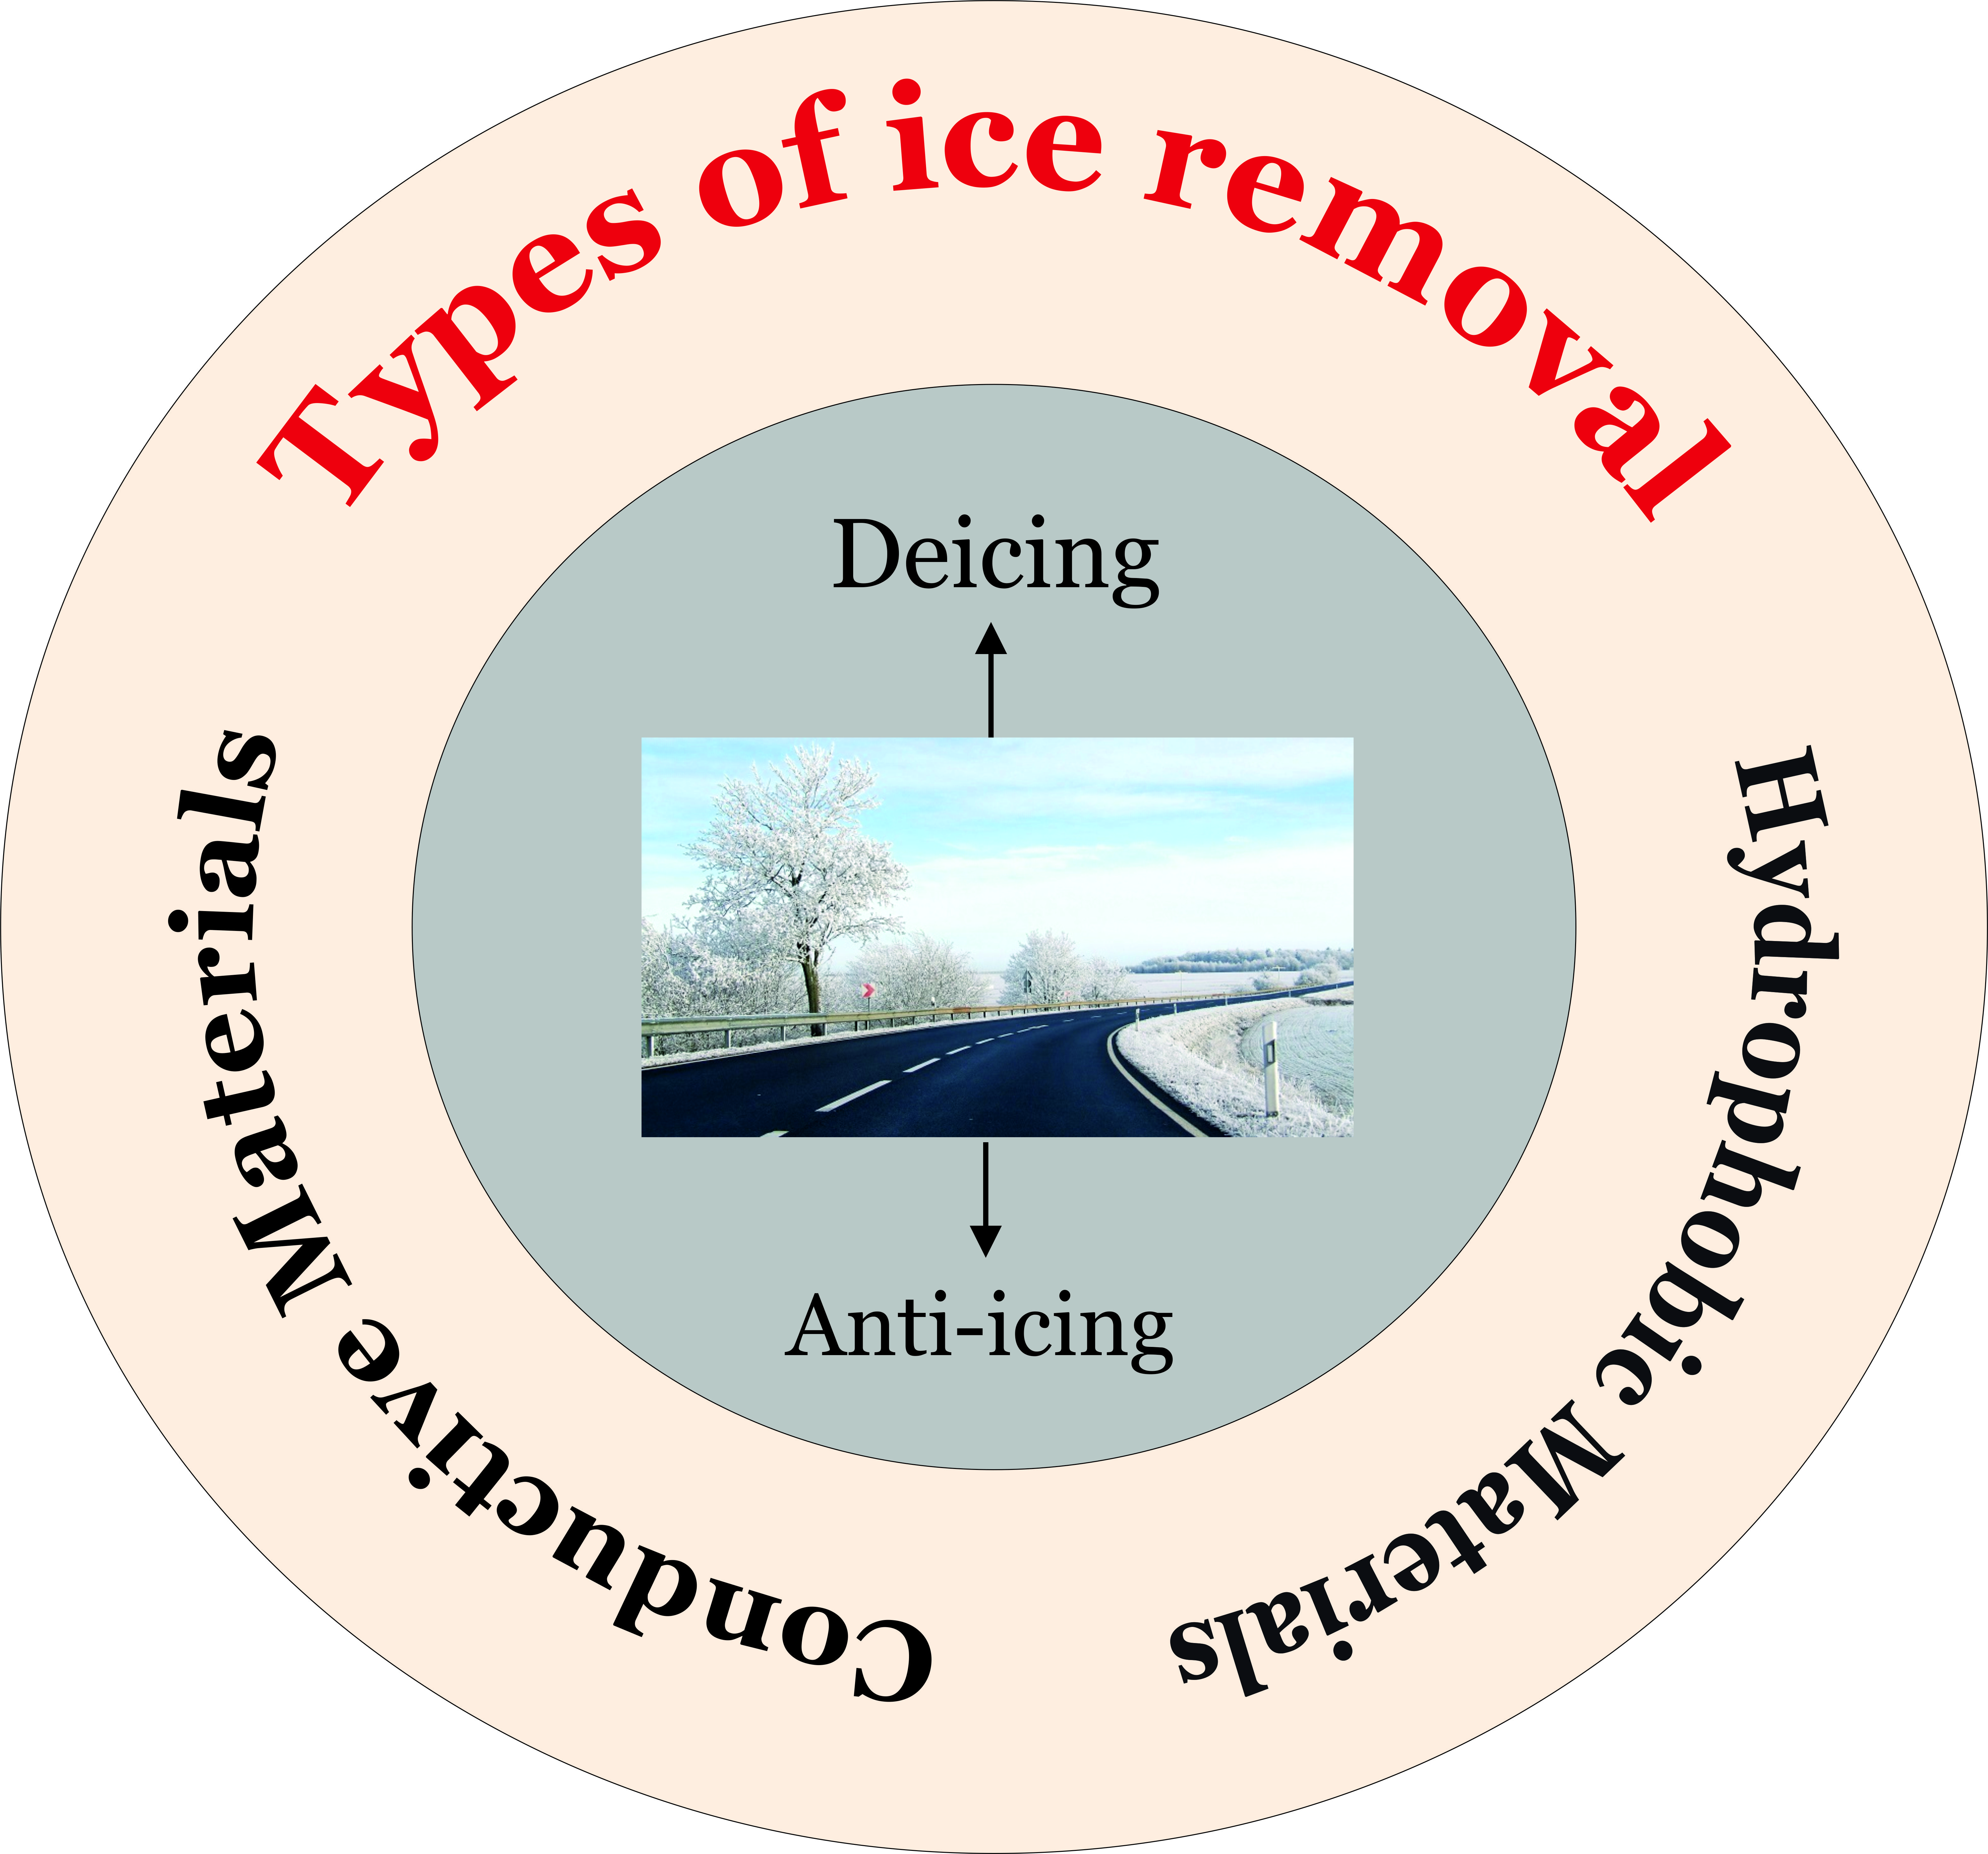 5 Types Of Deicing Equipment, And Their Advantages And Disadvantages